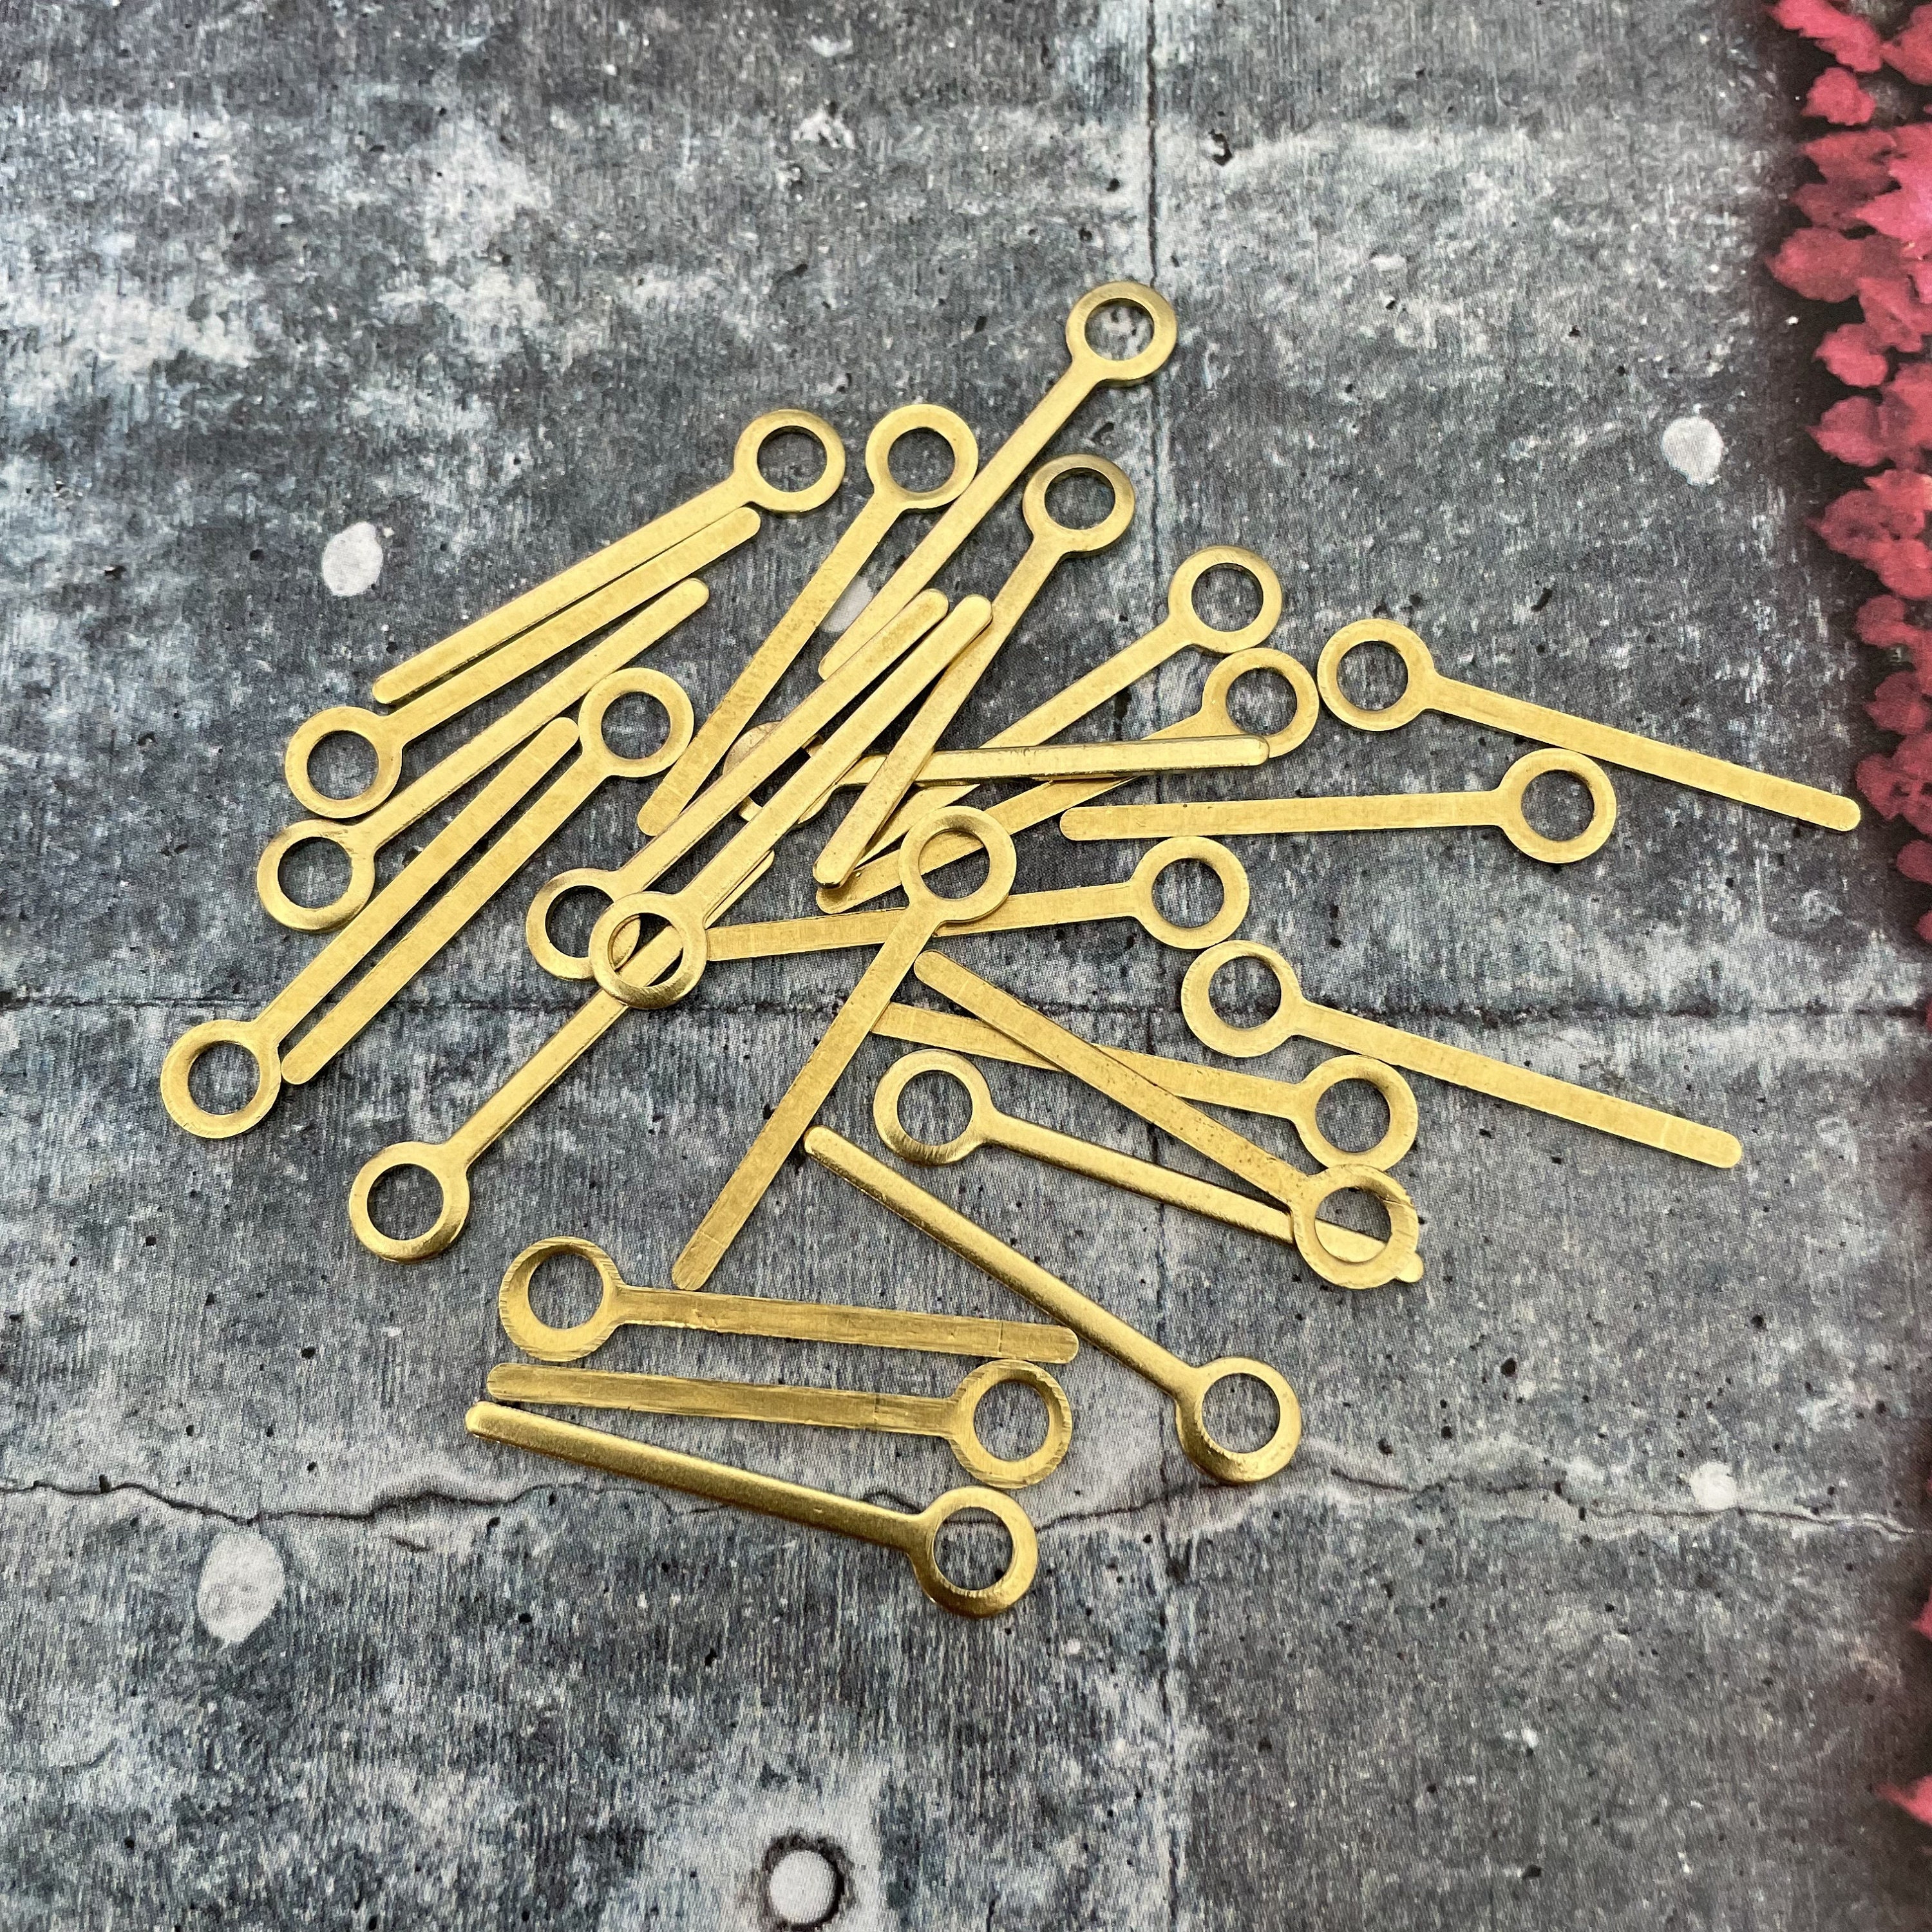 25 Pieces Brass Earring Findings,one Set, Endless Possibilities